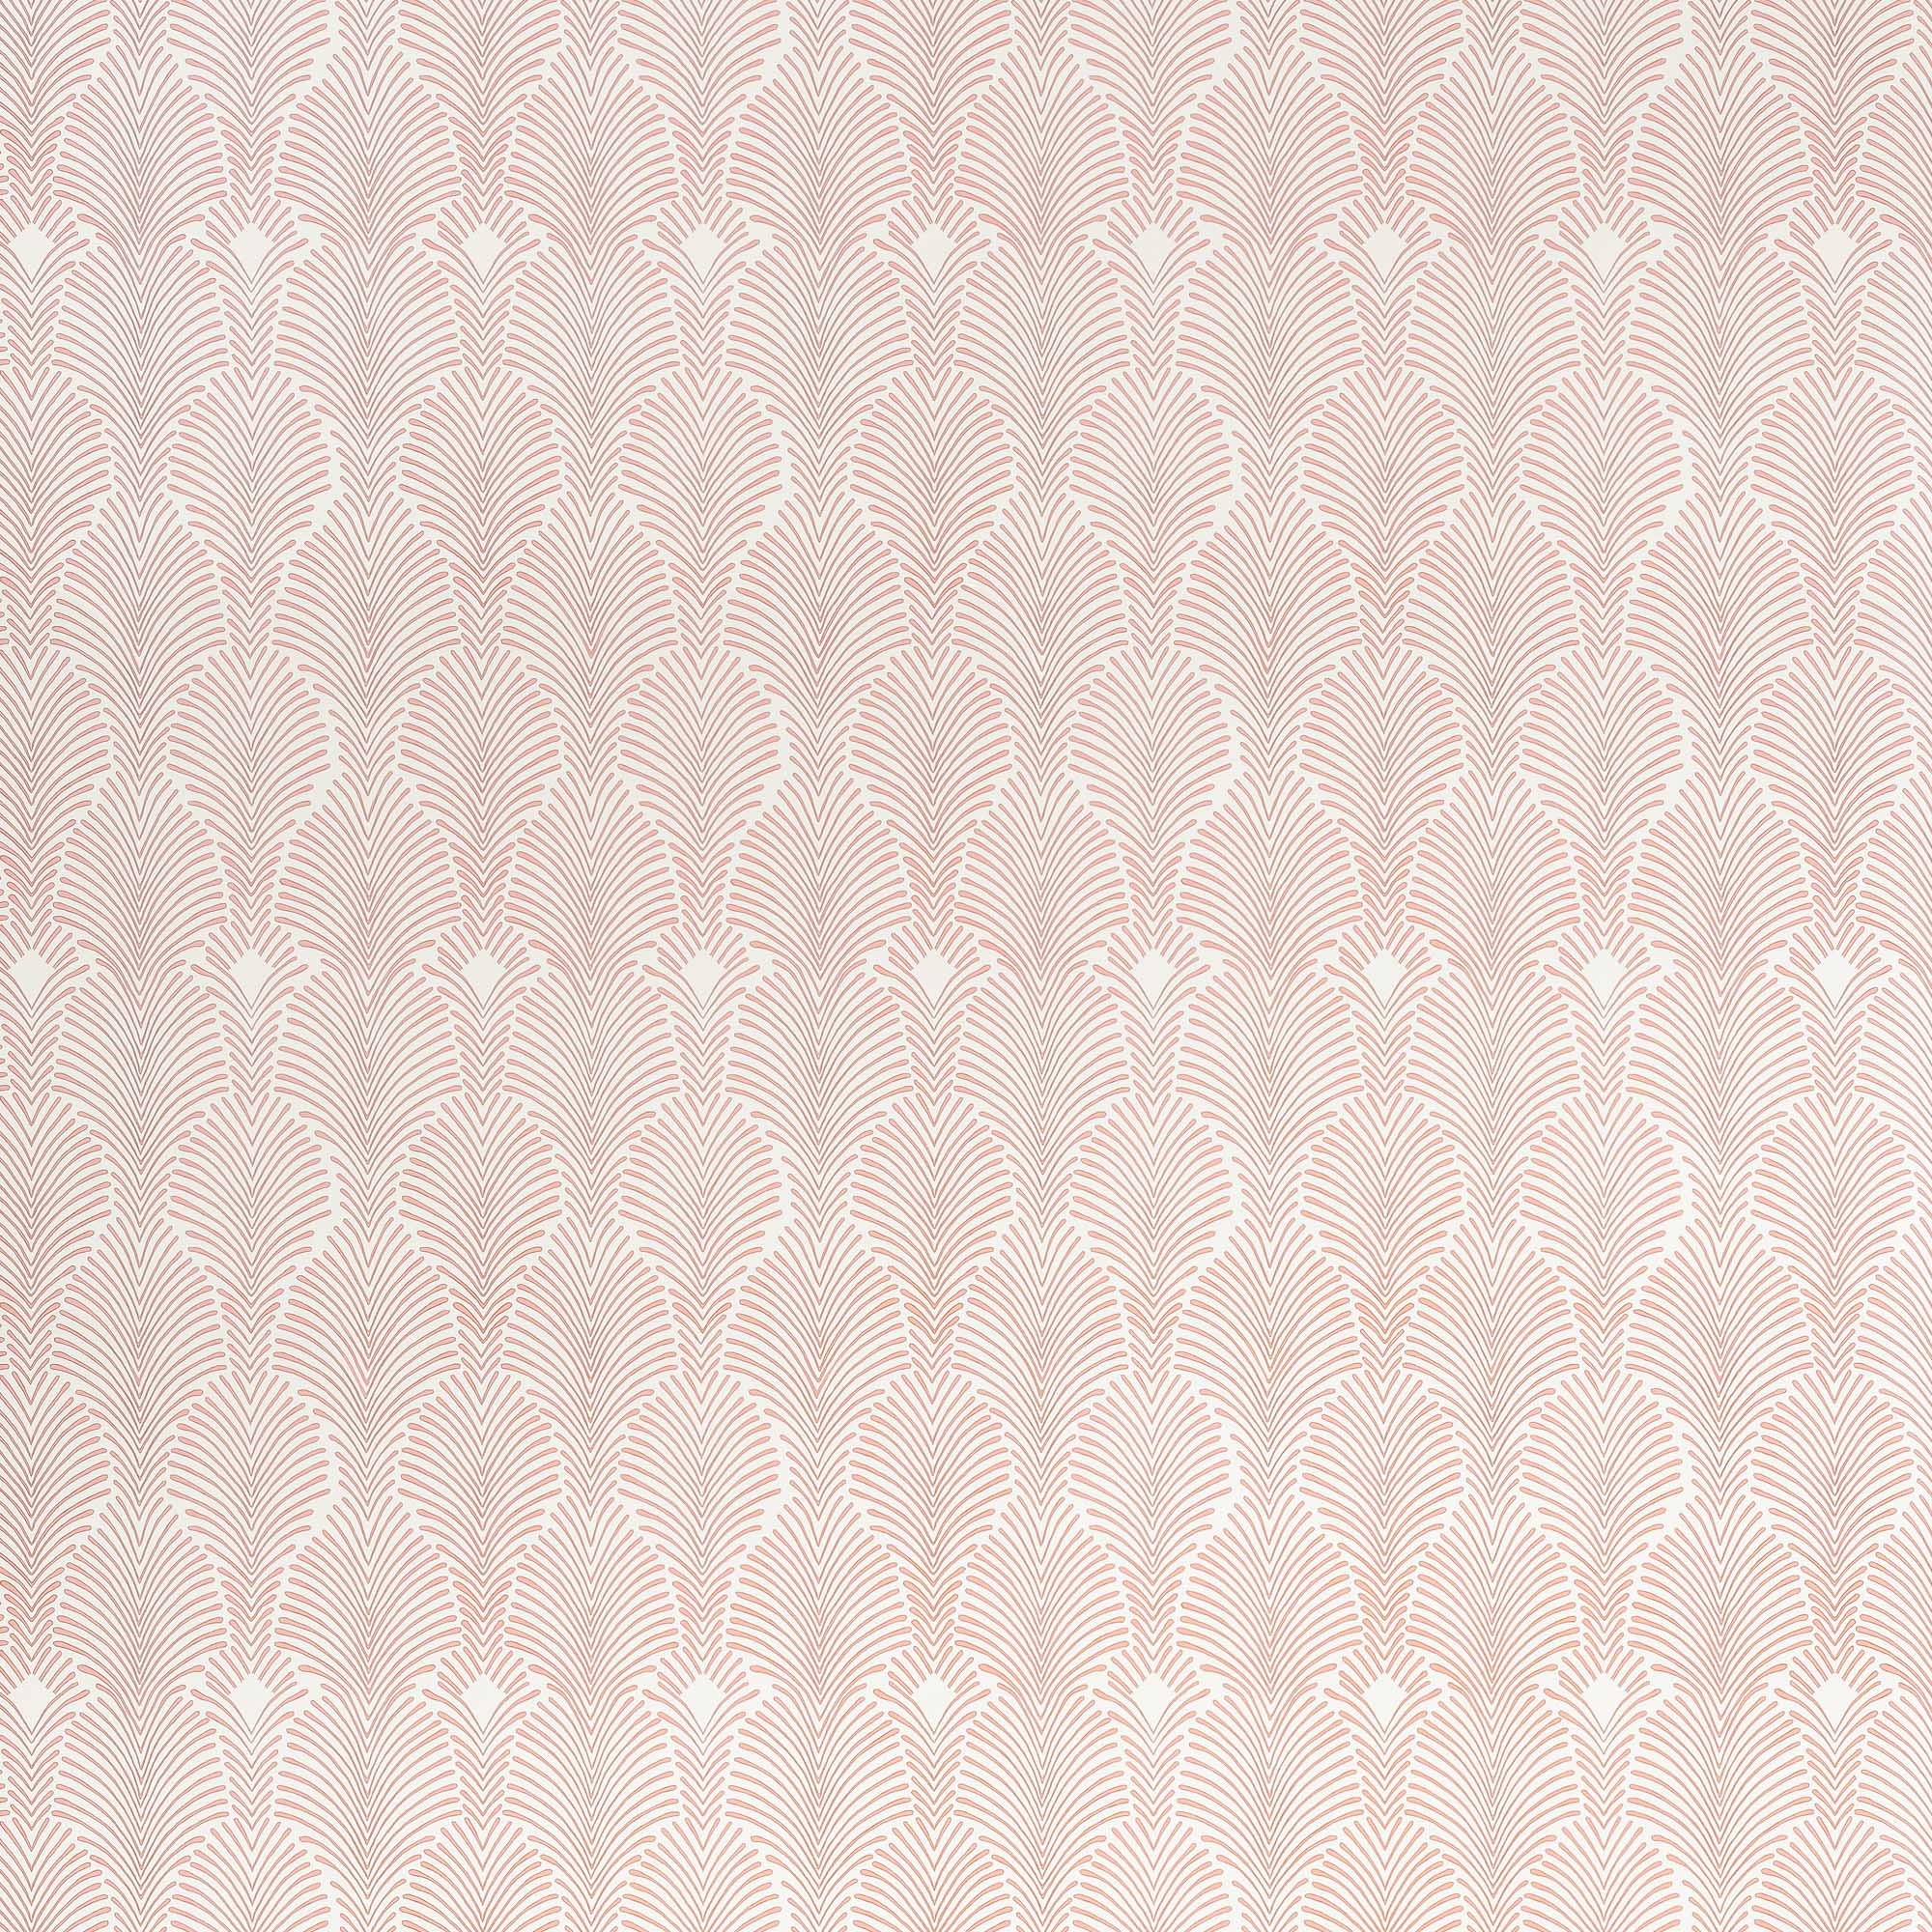 Detail of fabric in a striped damask pattern in dusty rose on a cream field.